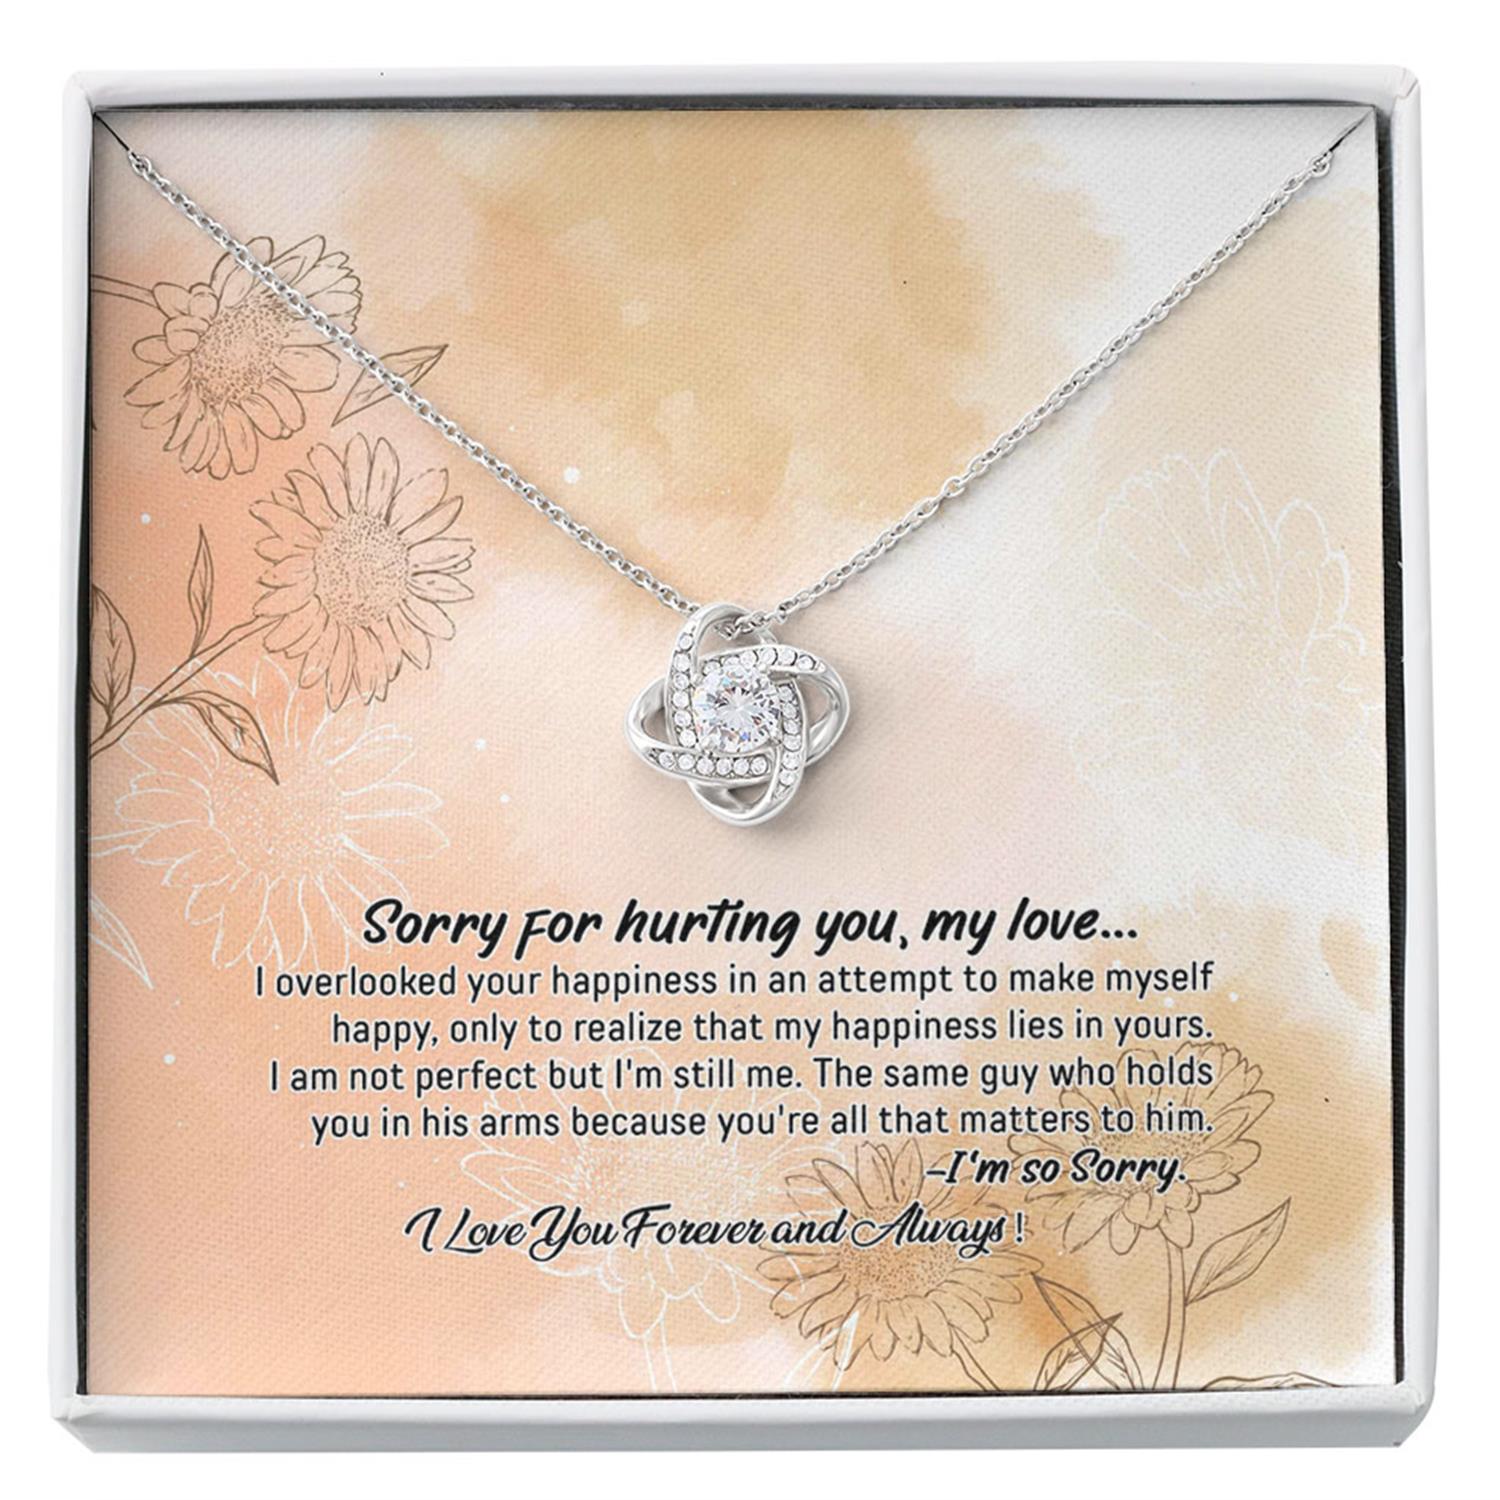 Girlfriend Necklace, Wife Necklace, To My Love "Happiness" Apology Gift Set Necklace Gift Custom Necklace